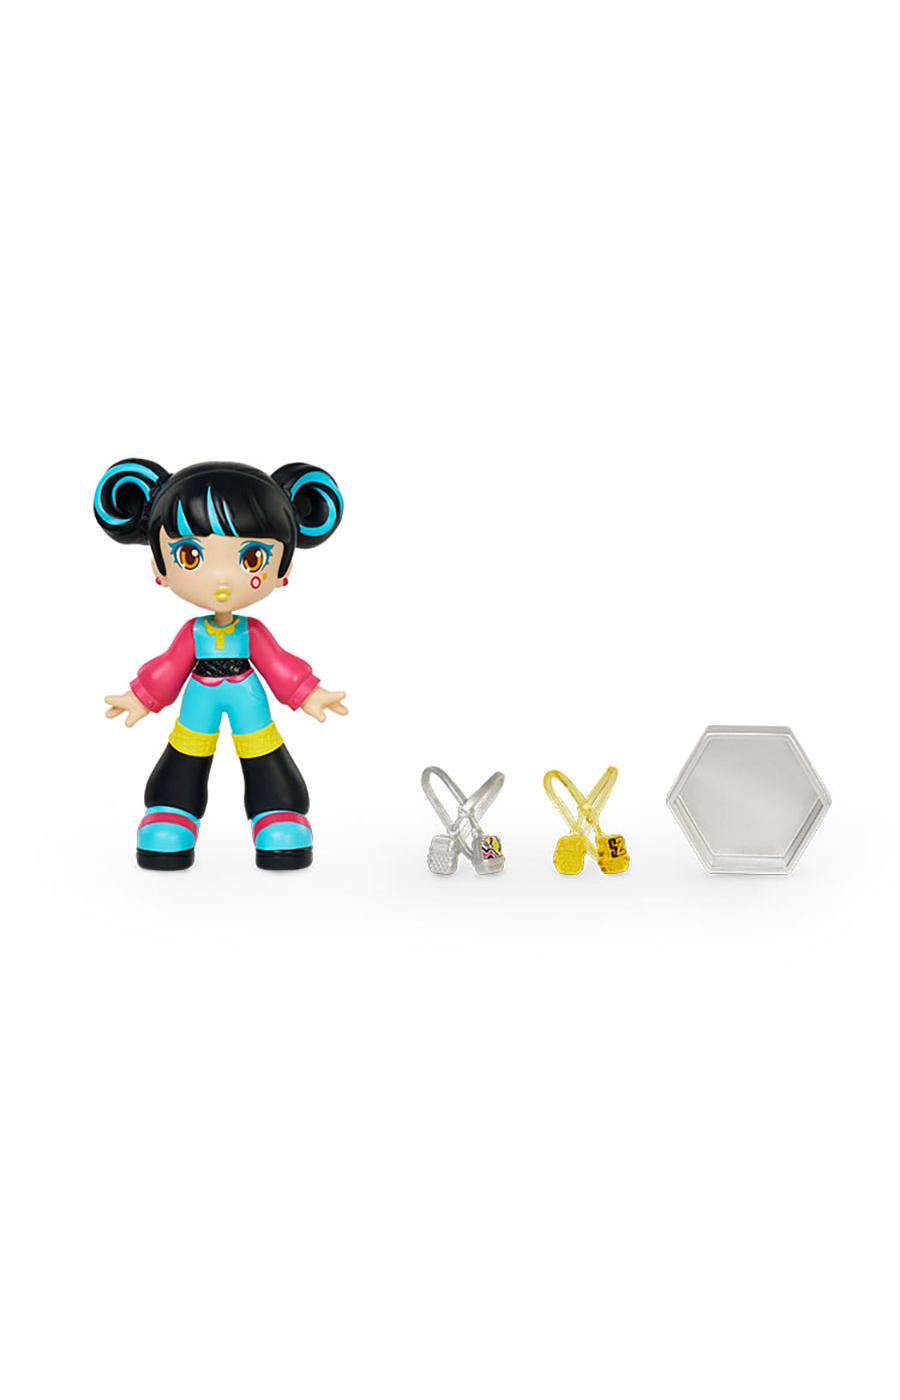 Squadz Place Tokyo Trends Collectible Doll; image 3 of 11